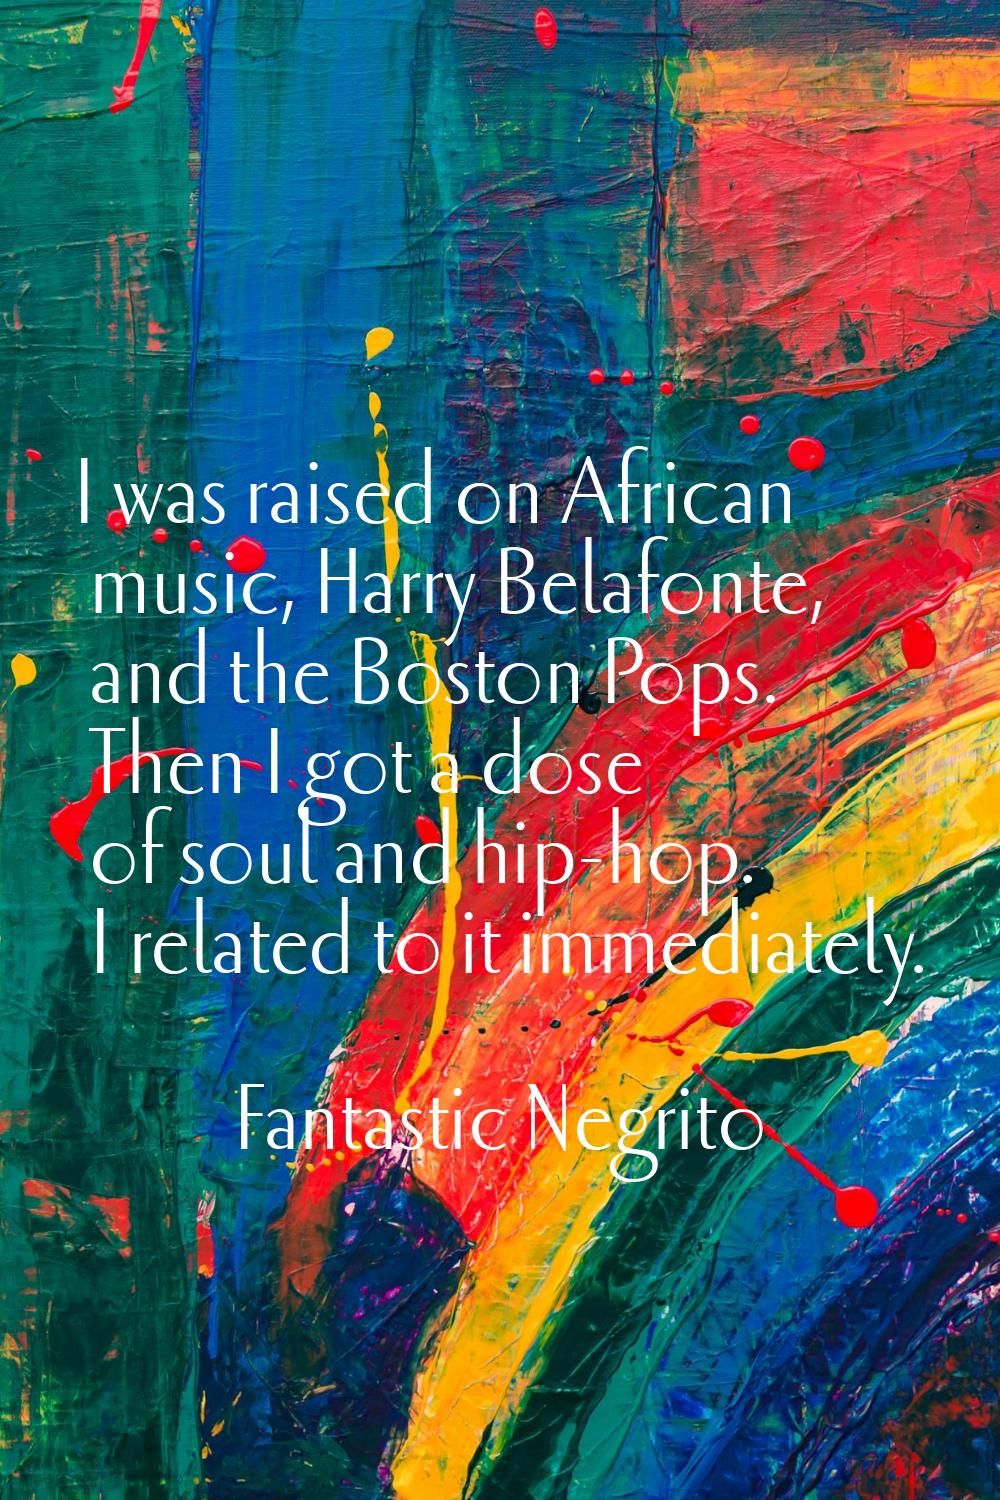 I was raised on African music, Harry Belafonte, and the Boston Pops. Then I got a dose of soul and 